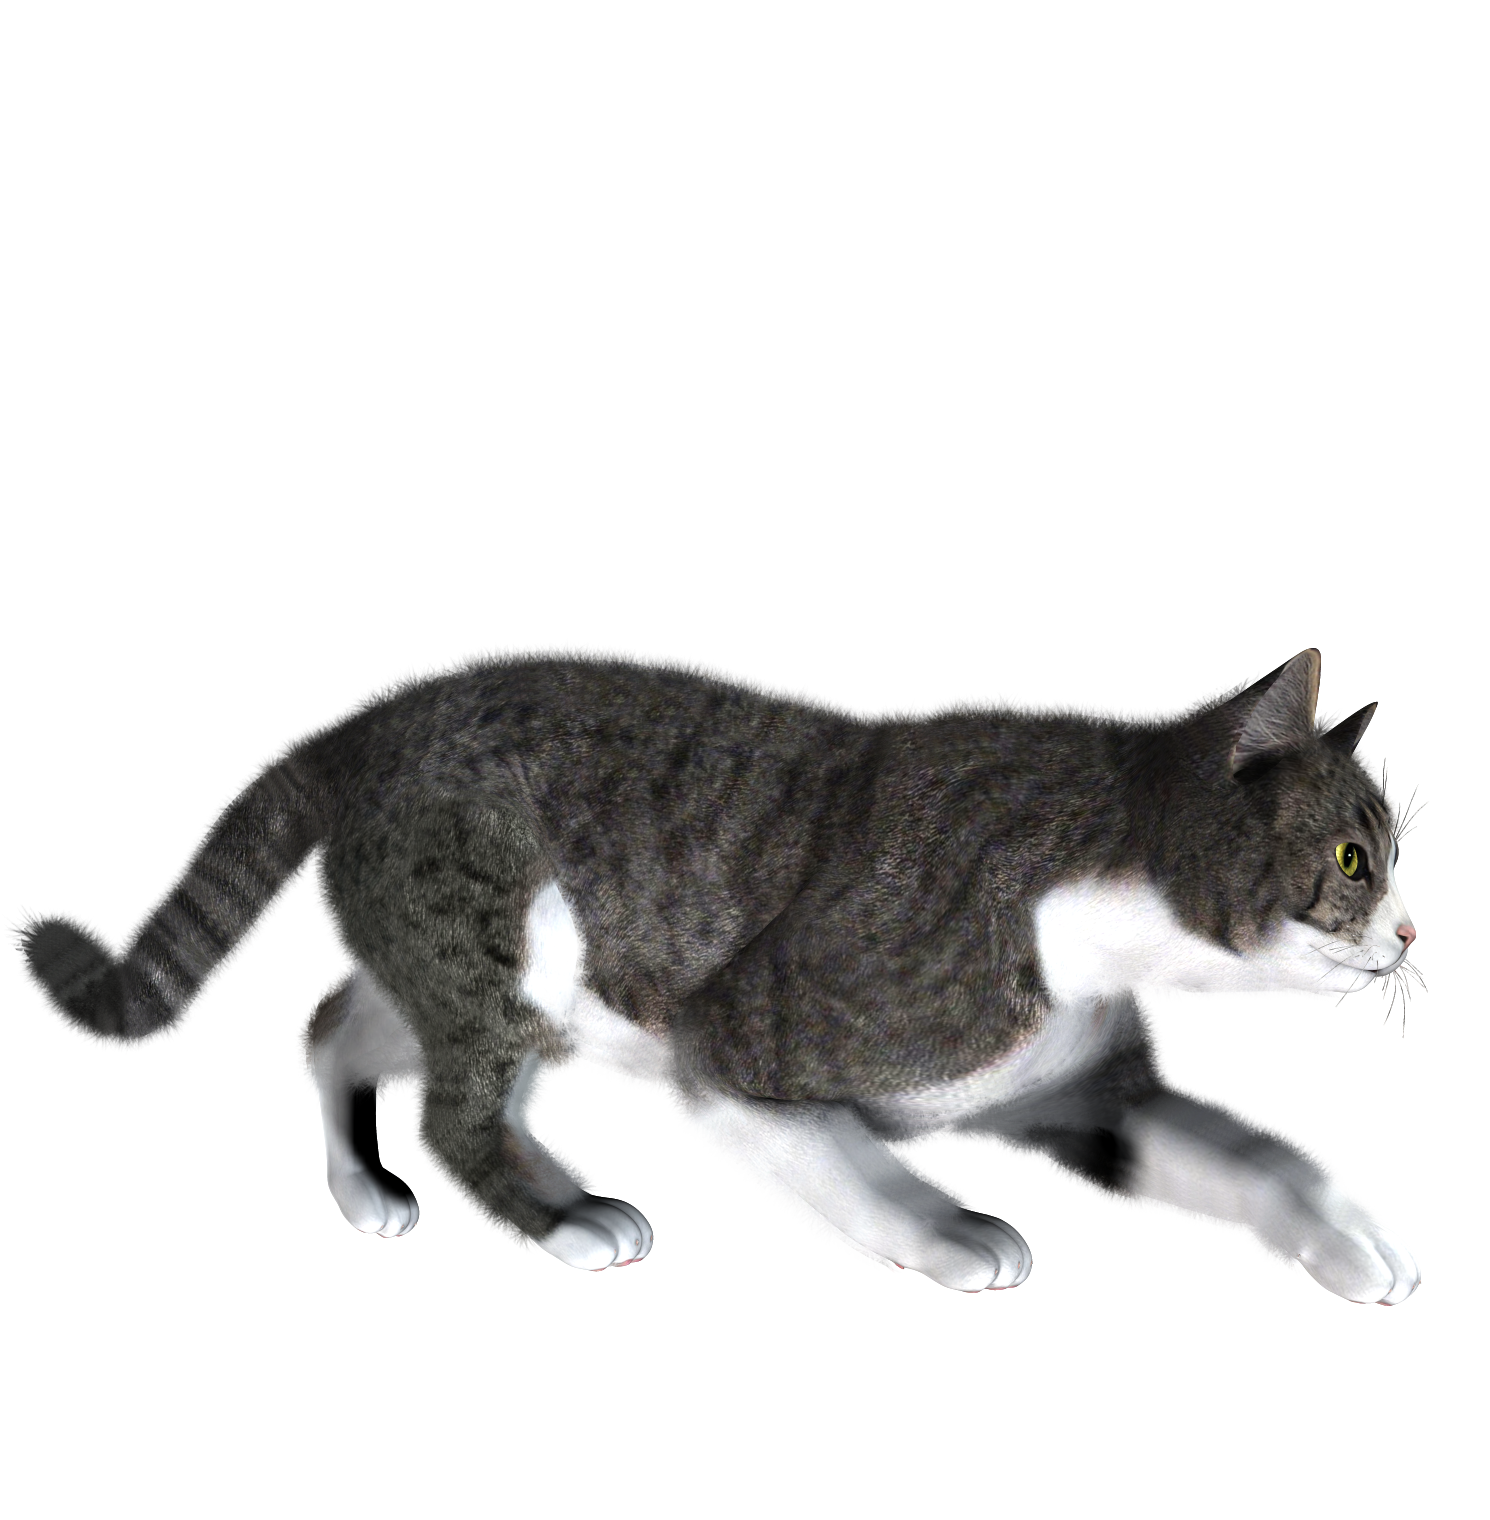 hunted cats png images download #9158